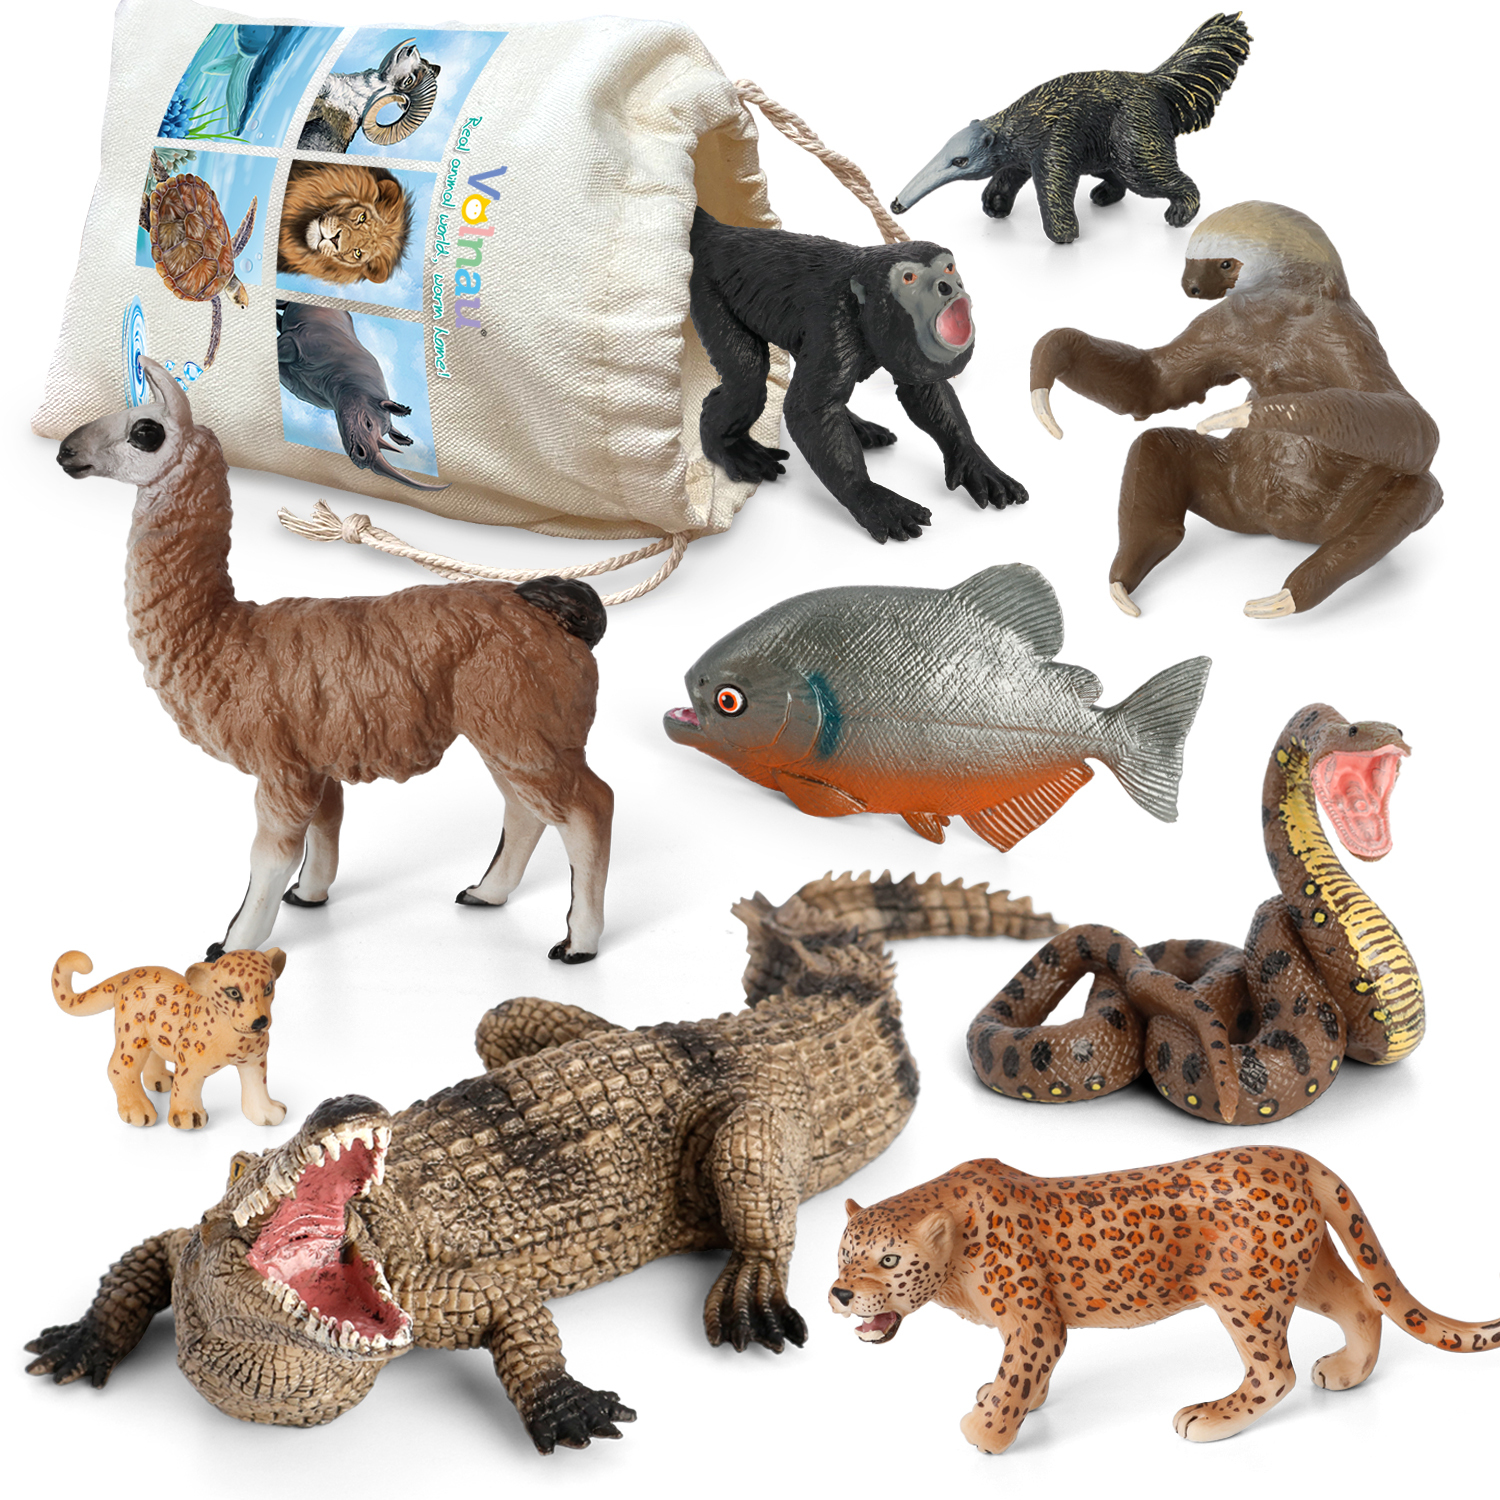 Volnau 9PCS South America Animal Figurines Toys Figures Zoo Pack for  Toddlers Kids Christmas Birthday Gift Preschool Educational Rainforest  Jungle Forest Animals Sets